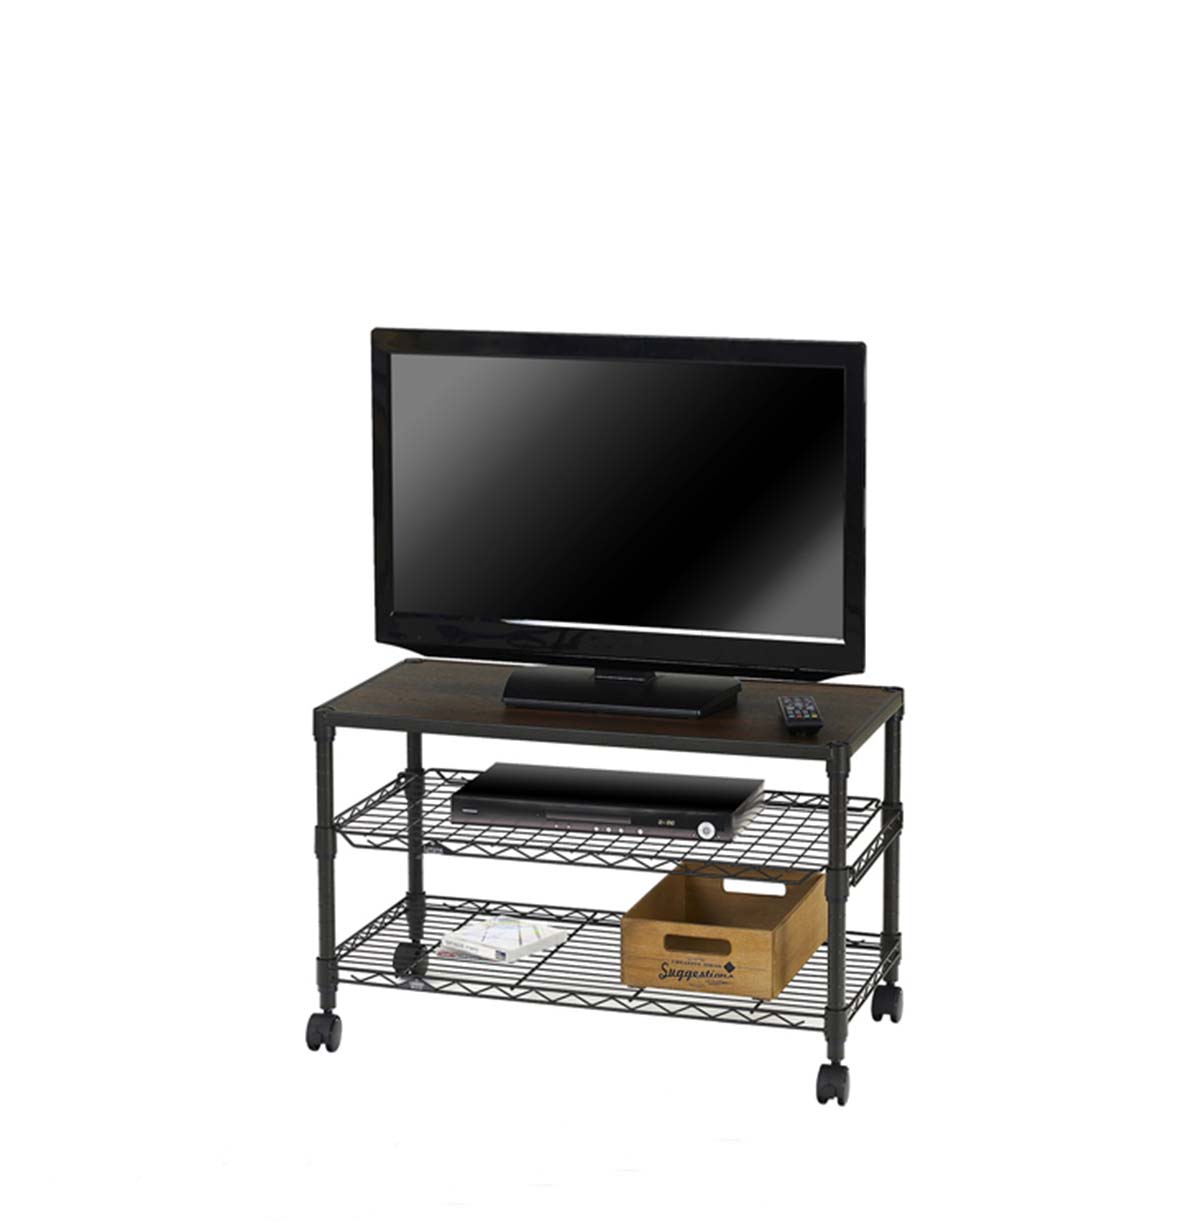 3-Tier TV Stand with Wood Top / TV Console Table With Open Storage Shelves on Wheels For Living Room